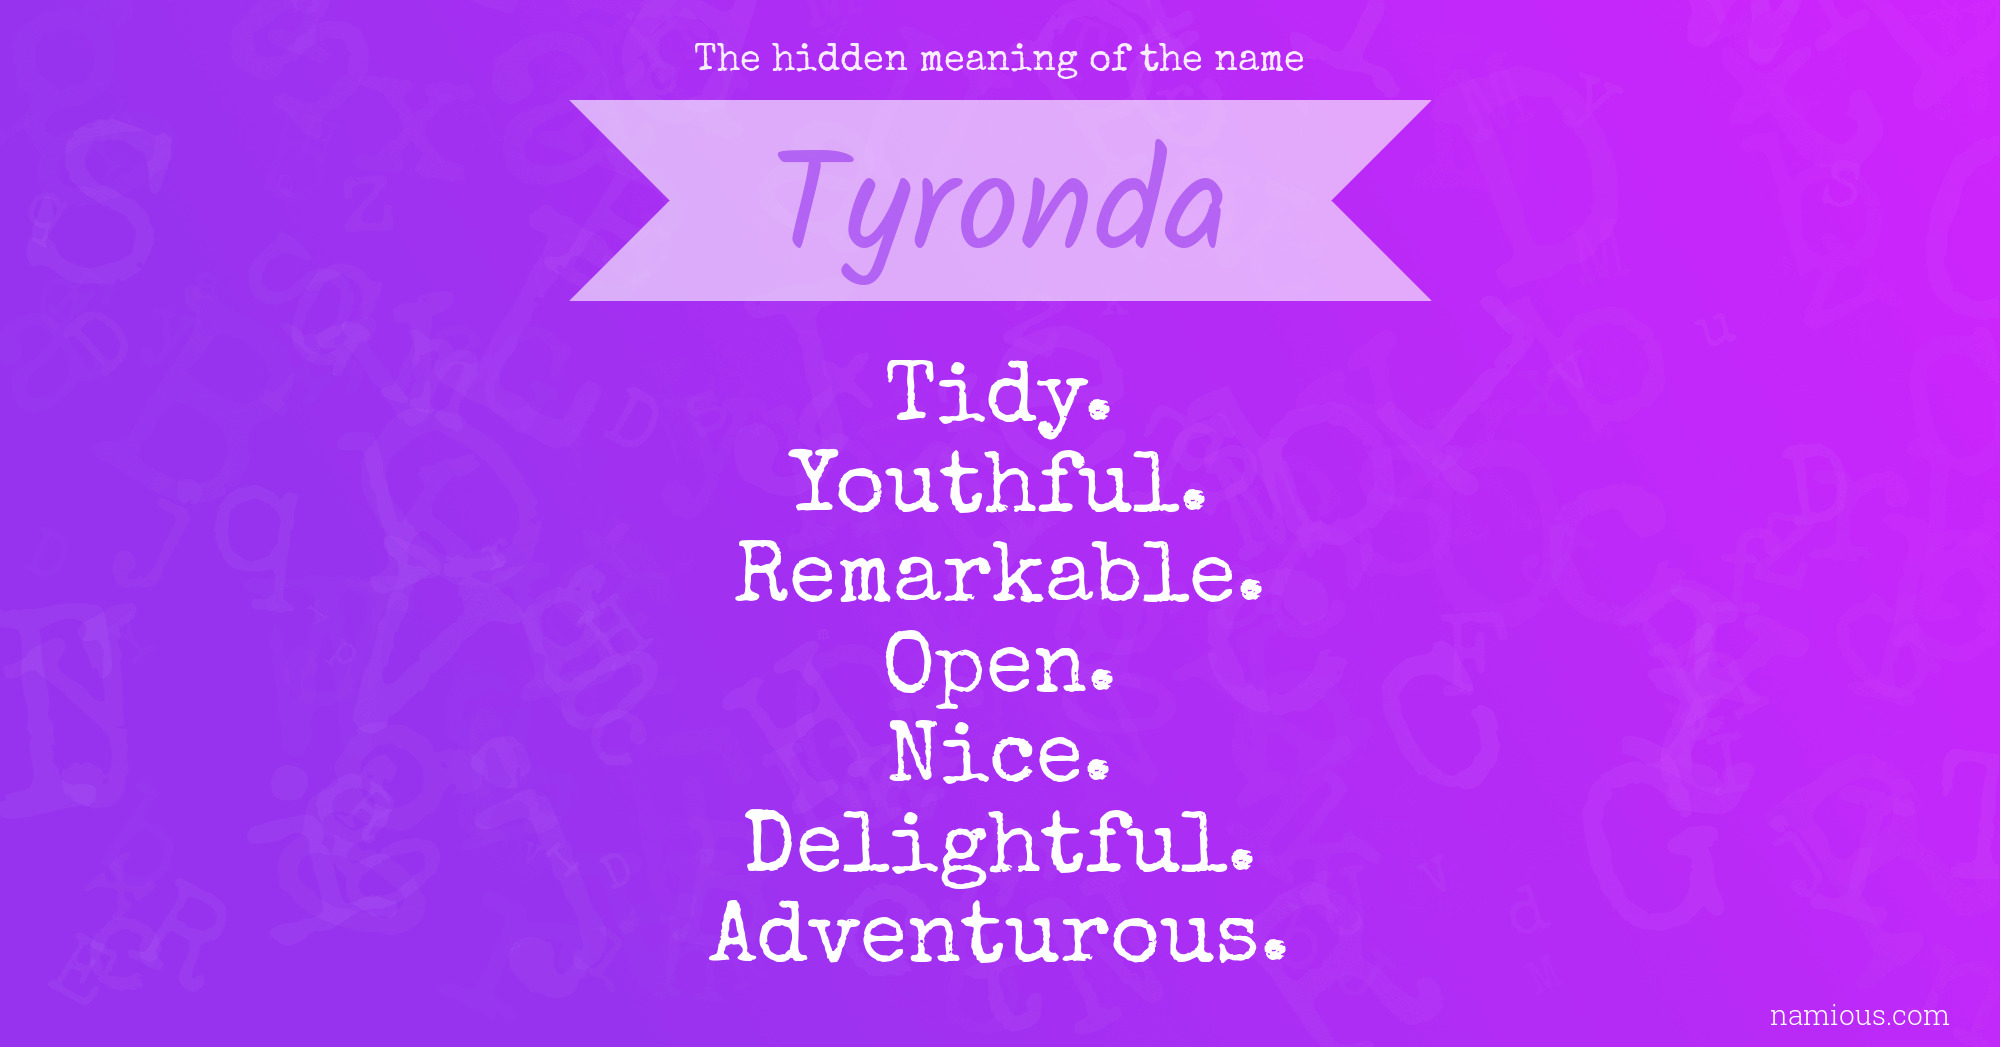 The hidden meaning of the name Tyronda